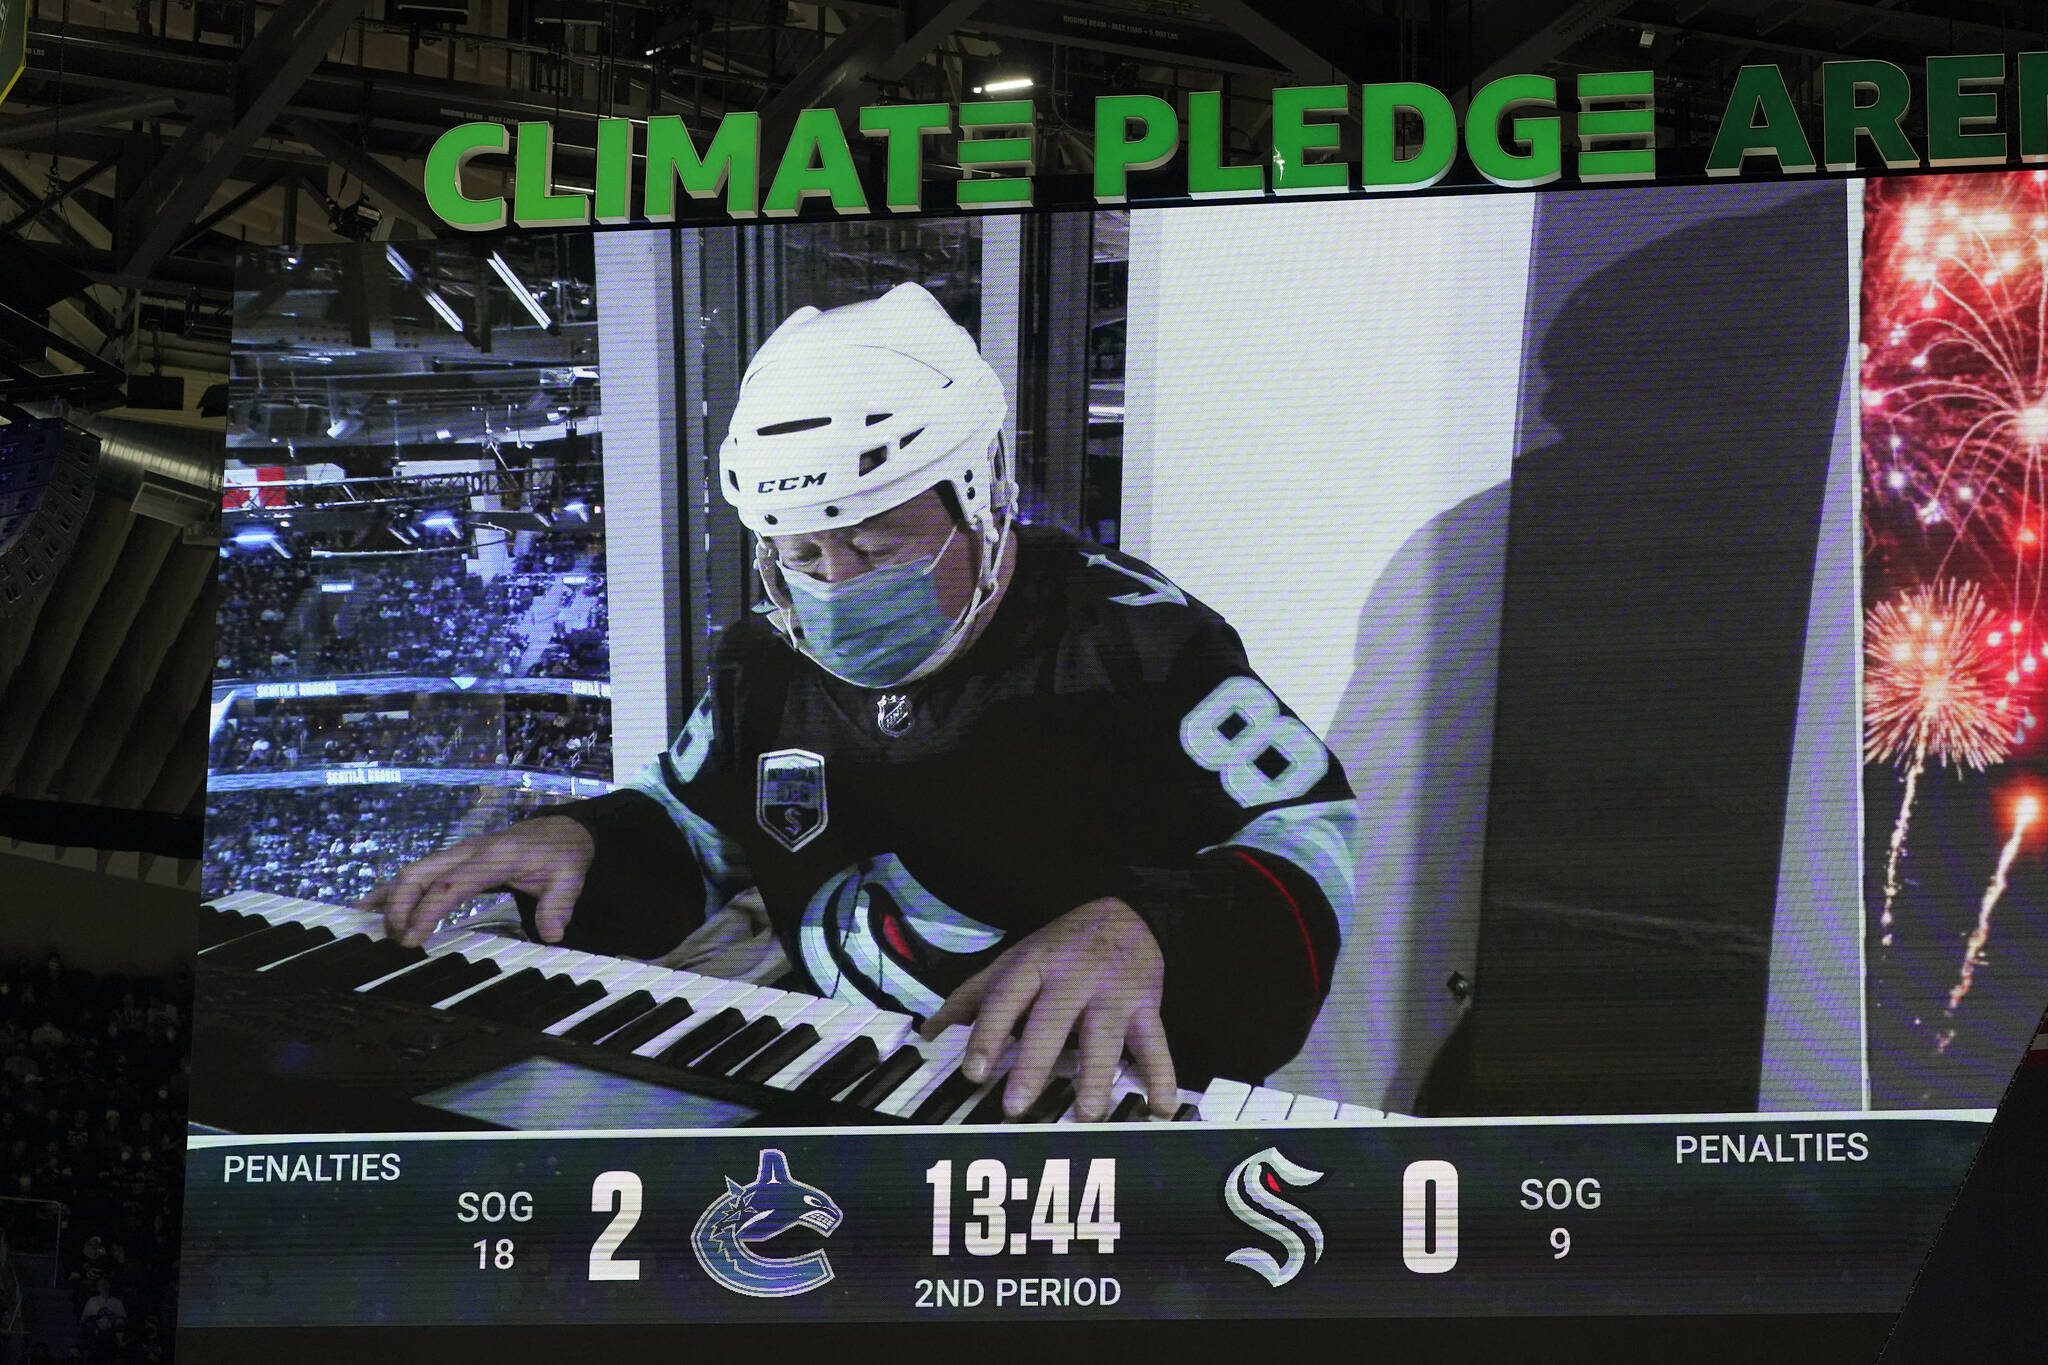 Rod Masters, who played the organist in the 1977 hockey movie “Slap Shot,” is shown on a video scoreboard as he plays during the second period of an NHL hockey game between the Seattle Kraken and the Vancouver Canucks, Saturday, Jan. 1, 2022, in Seattle. The Kraken announced recently that Masters will be the team’s new in-house organist. (AP Photo/Ted S. Warren)